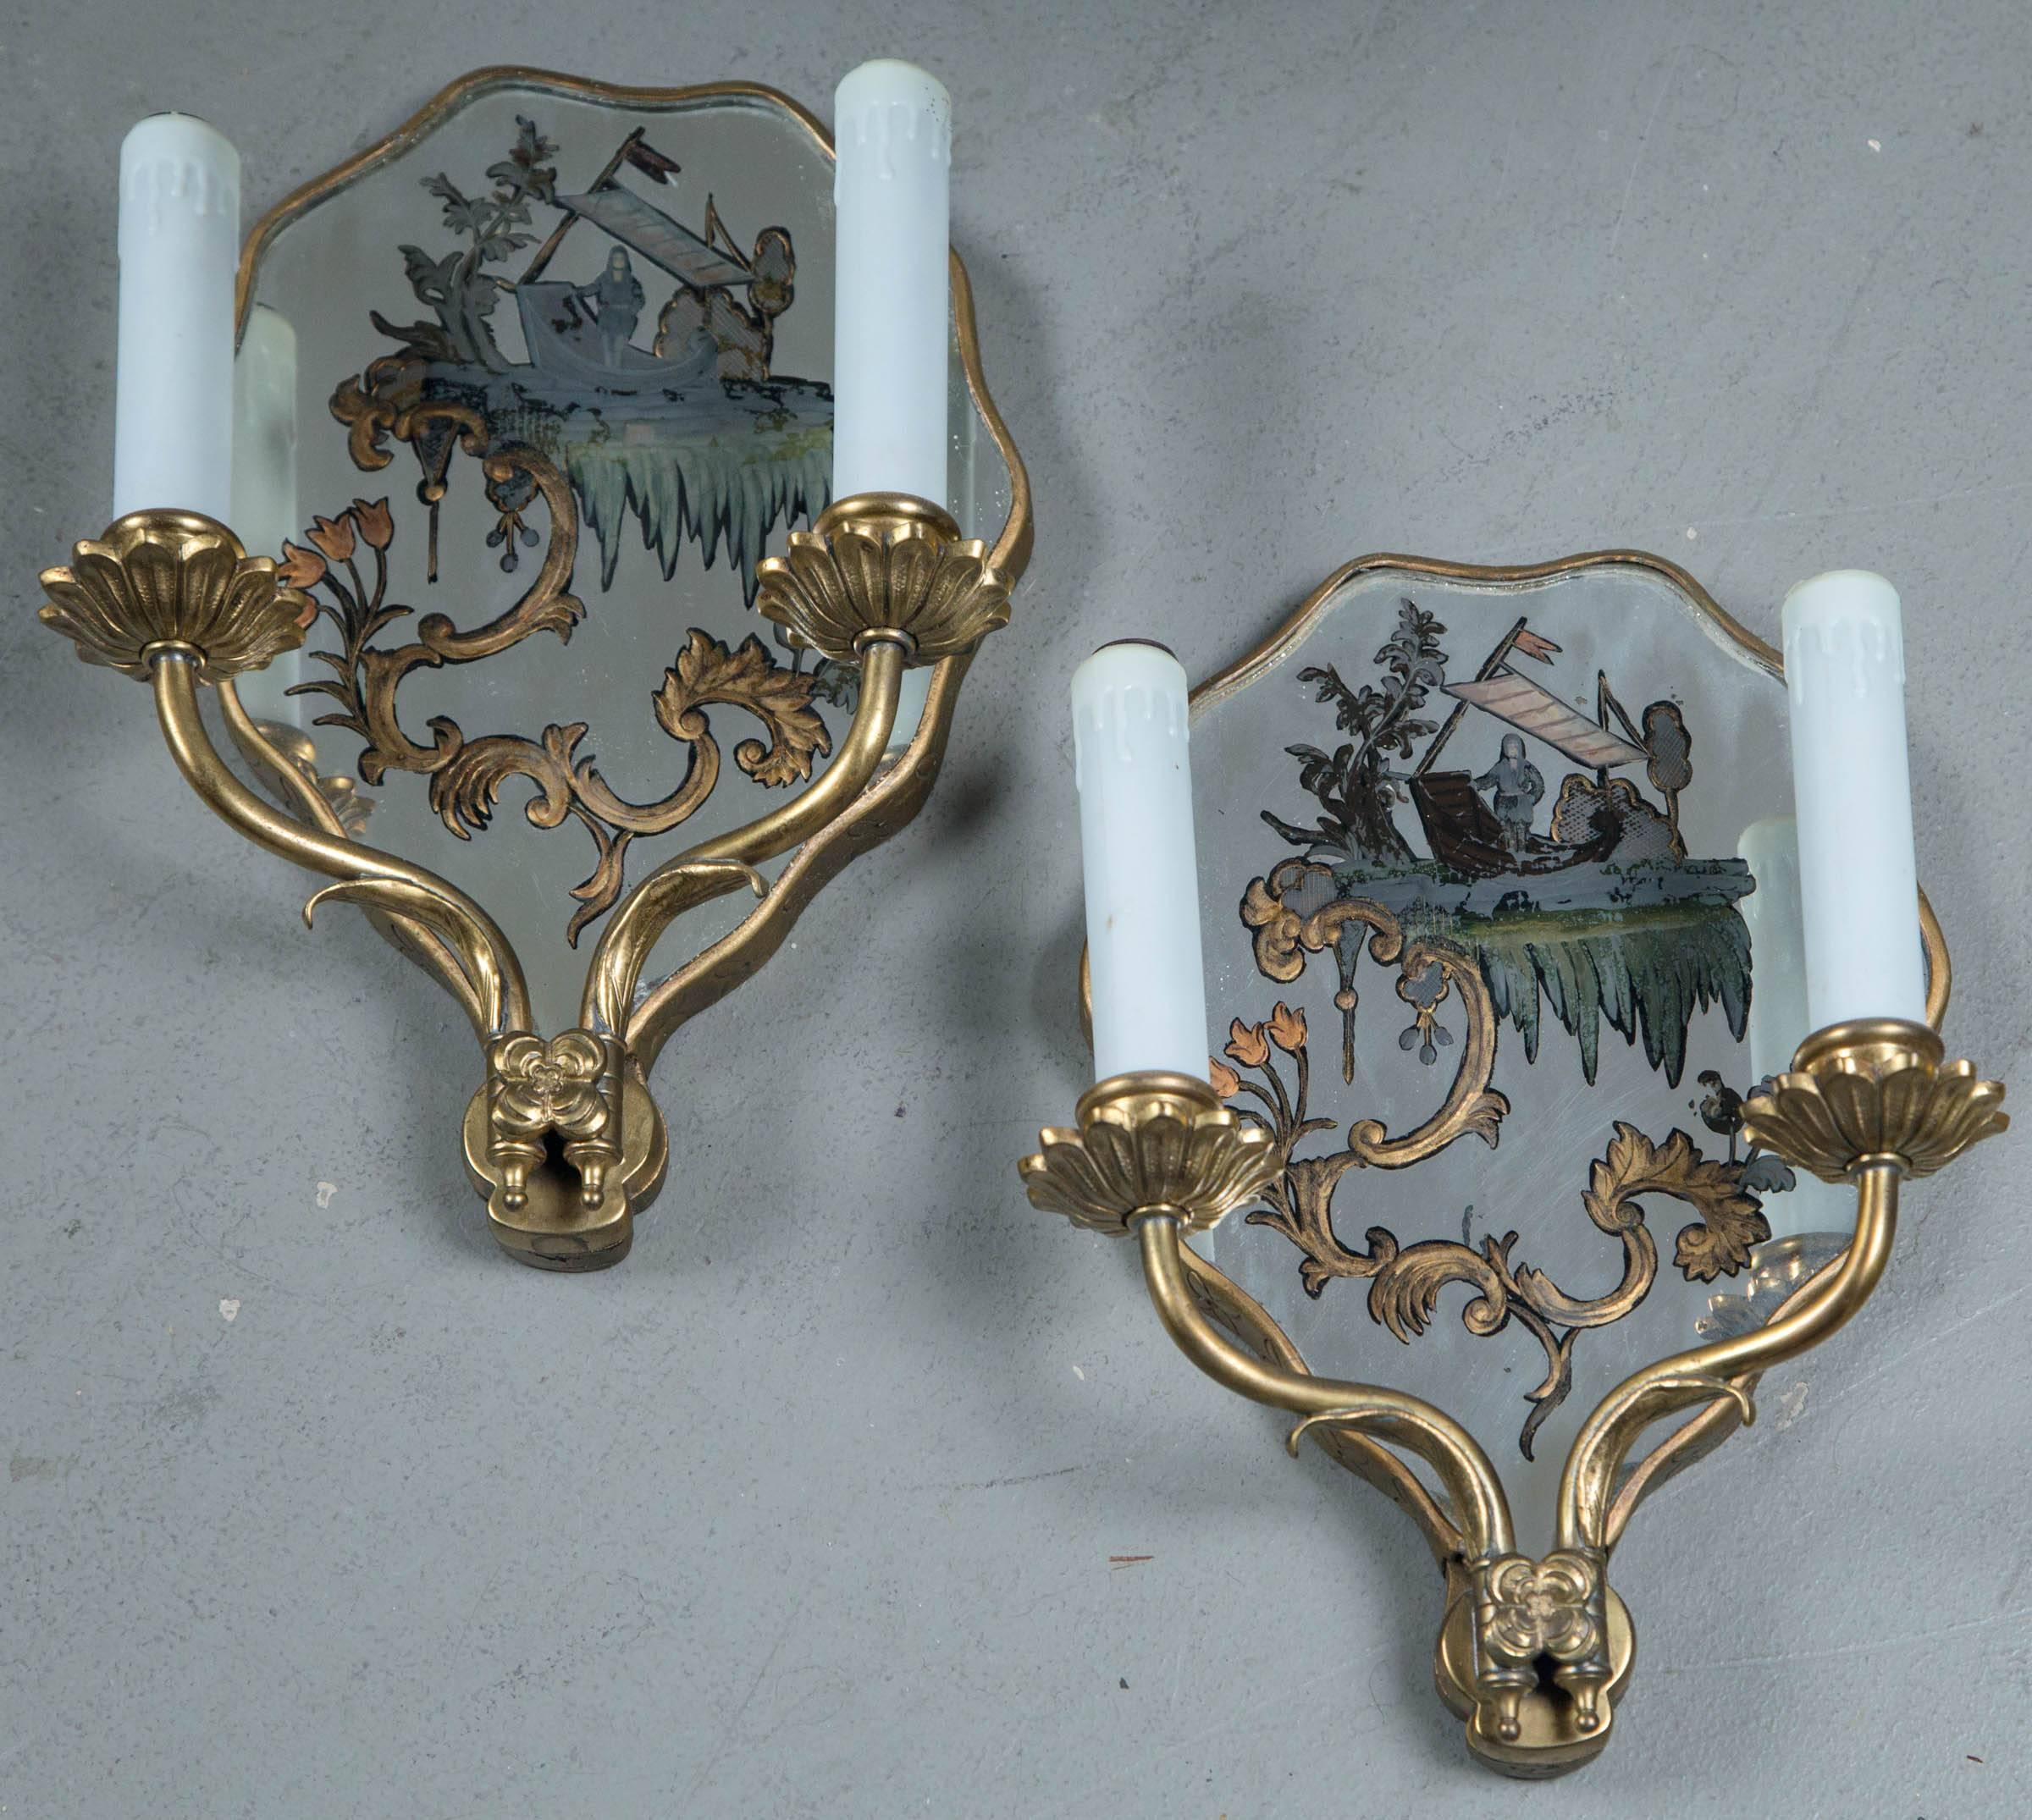 Early 20th Century Pair of circa 1920 Caldwell Hand-Painted Mirrored Sconces For Sale